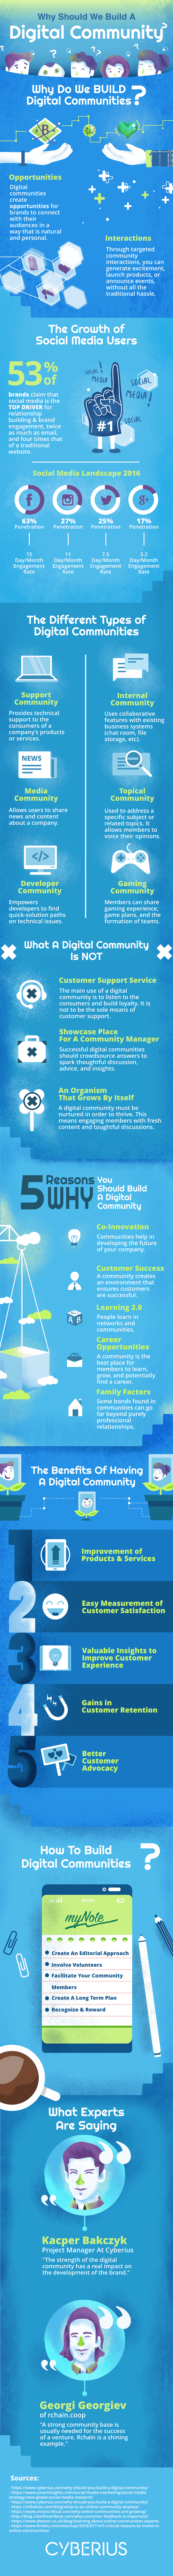 Why Should We Build A Digital Community? - #infographic